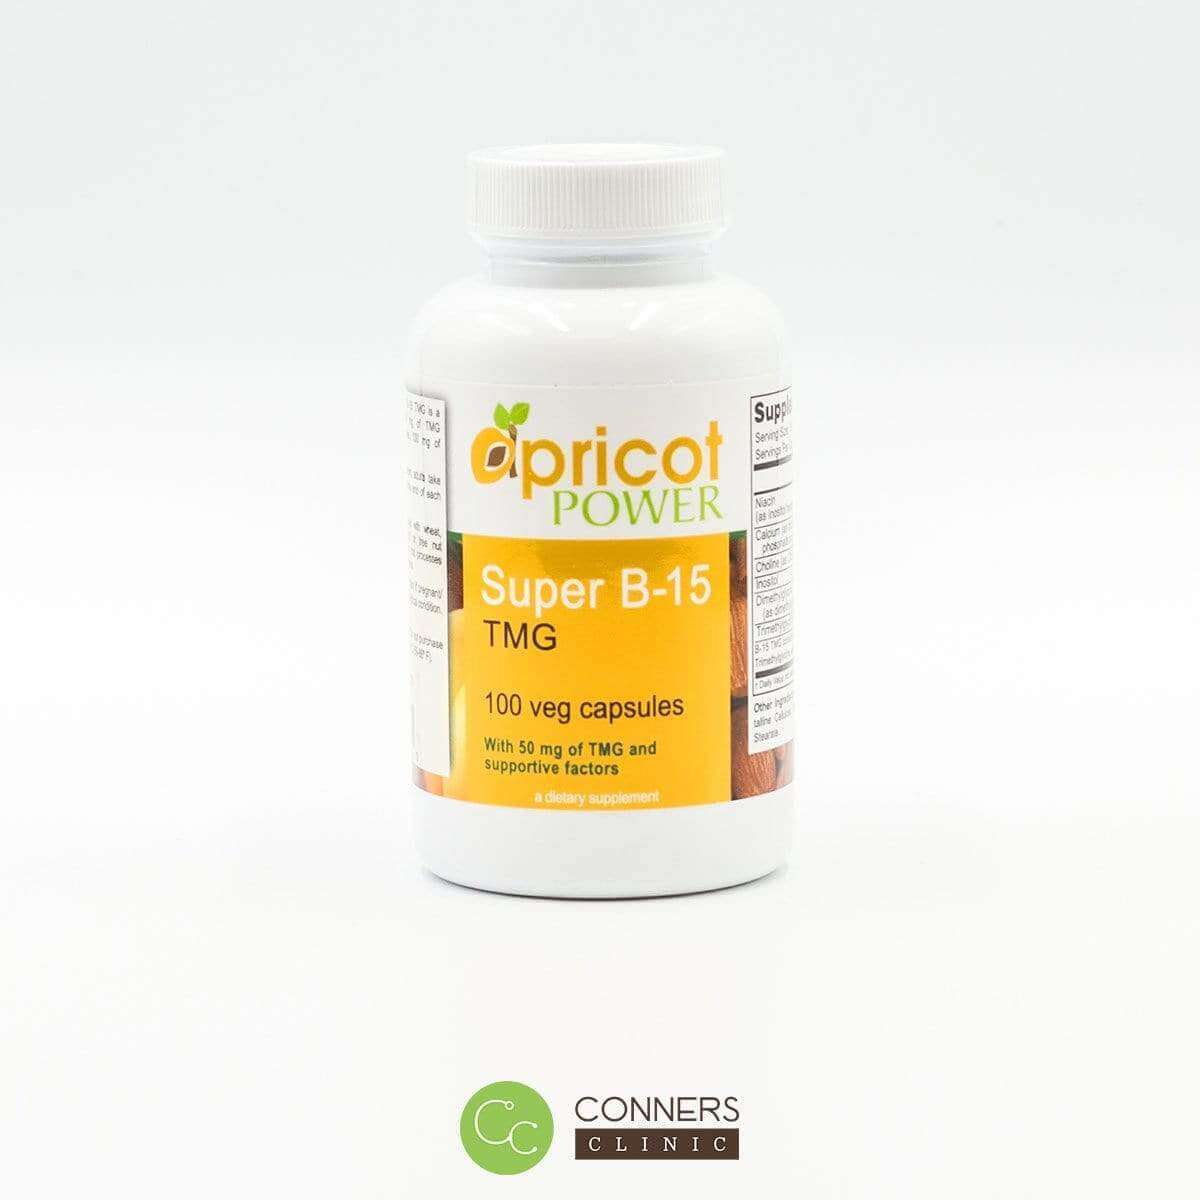 Apricot Power - Super B-15 TMG Apricot Power Supplement - Conners Clinic